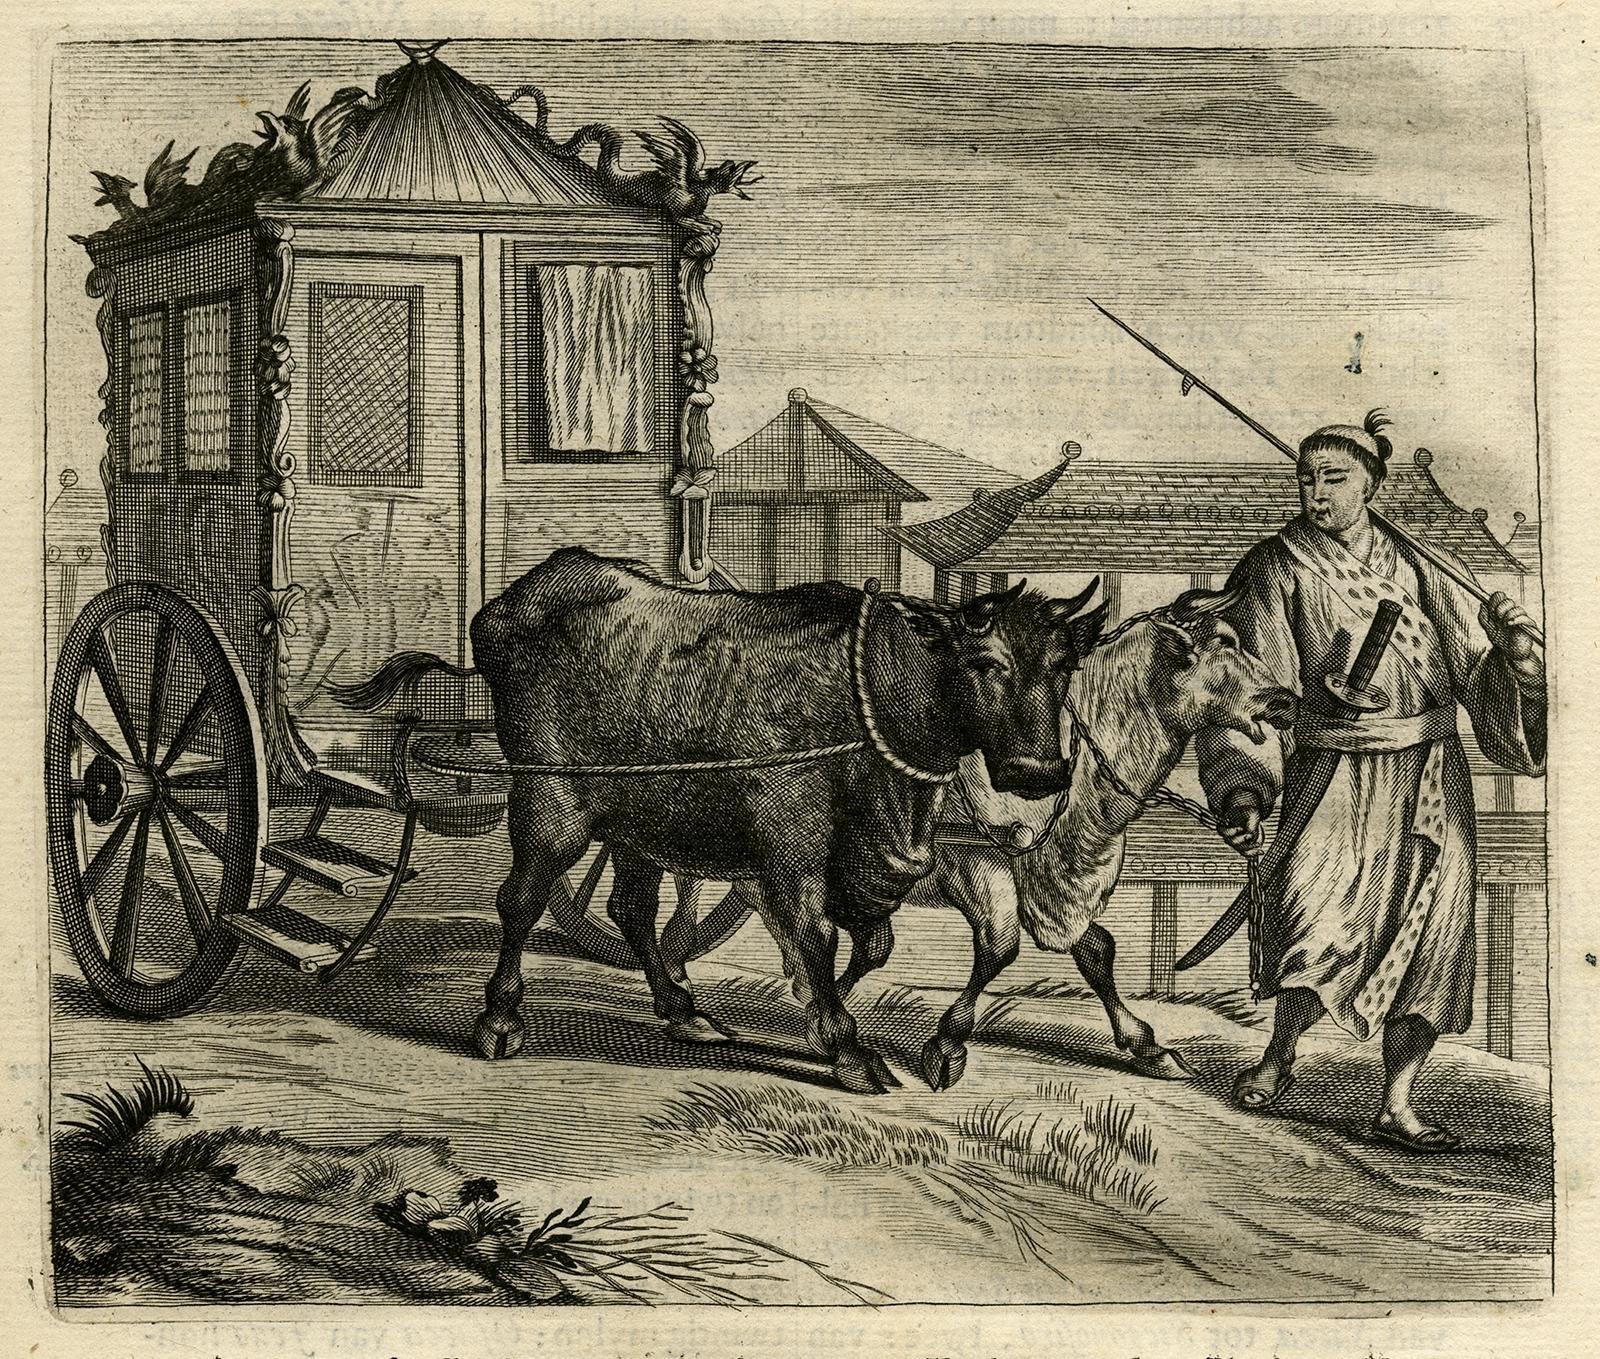 Antique print titled 'Groote Staatsie der Kaisarlyke Nicht.' 

This print shows a large procession of the Emperor's Niece. It shows a small carriage drawn by two oxen and led by a servant. This carriage was a noblewoman's carriage. Arnoldus